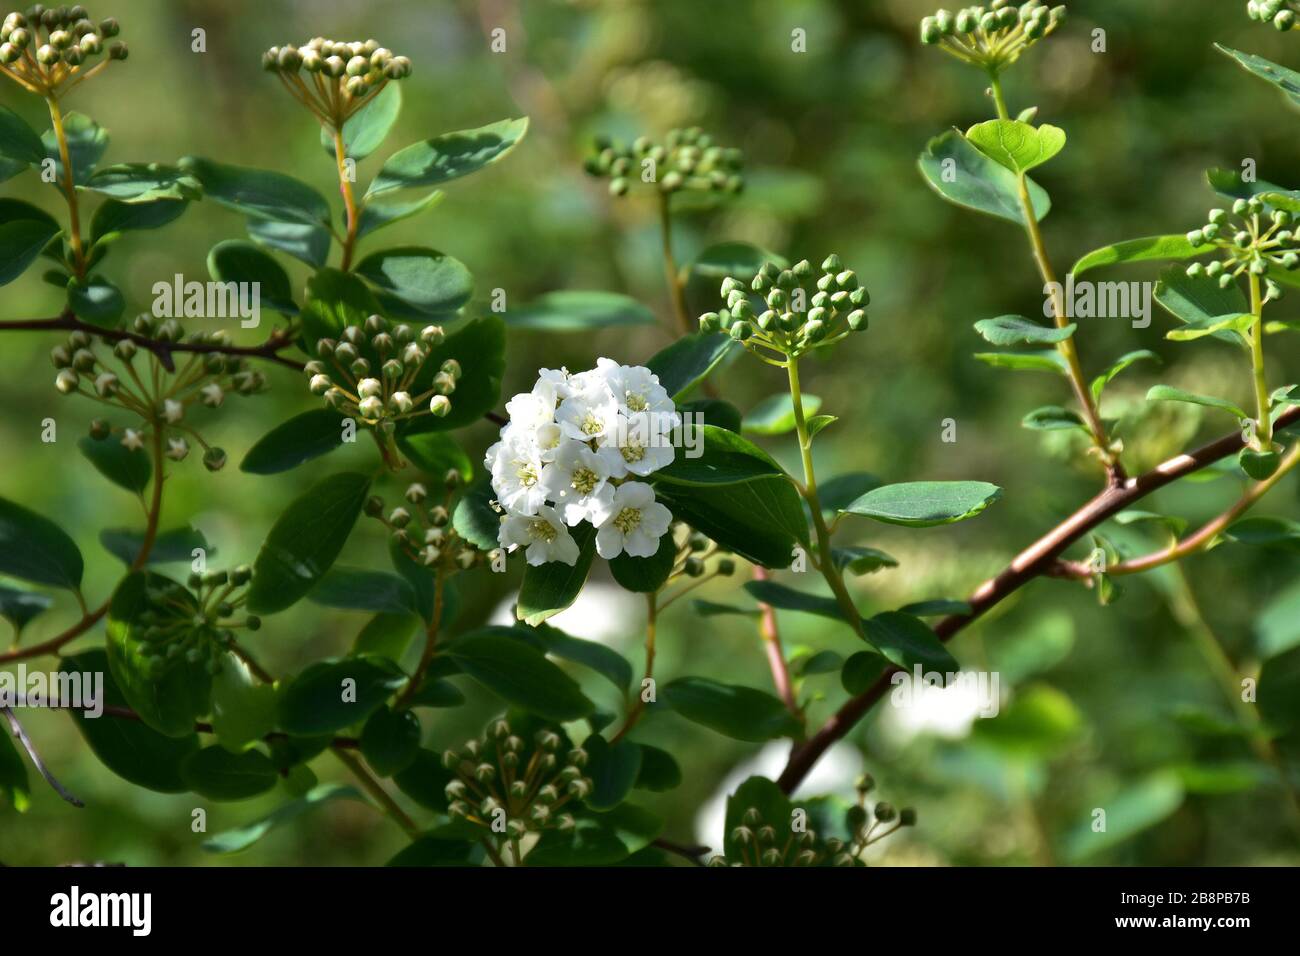 Clusters of buds and white flowers on a green ornamental shrub Stock Photo